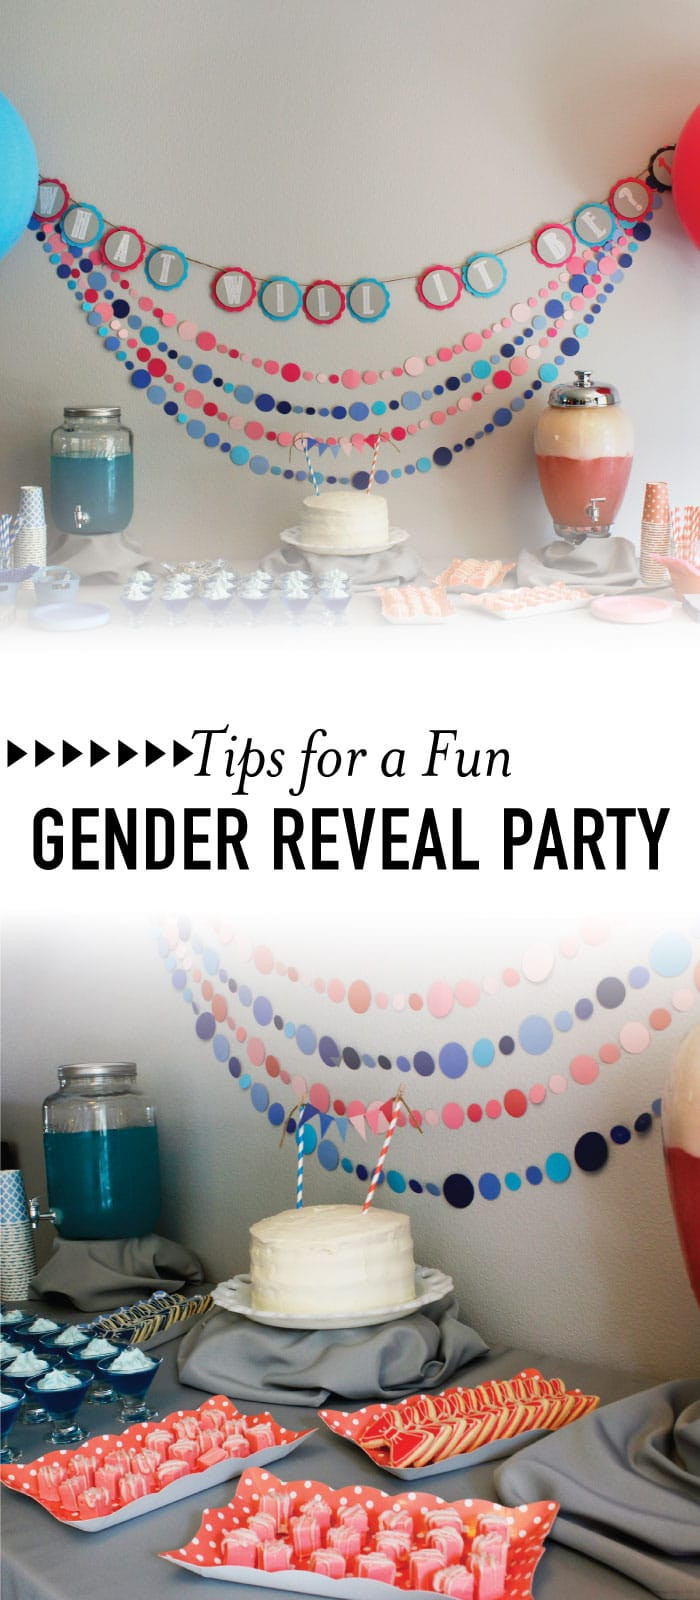 Simple Gender Reveal Party Ideas
 Tips for a DIY Gender Reveal Party